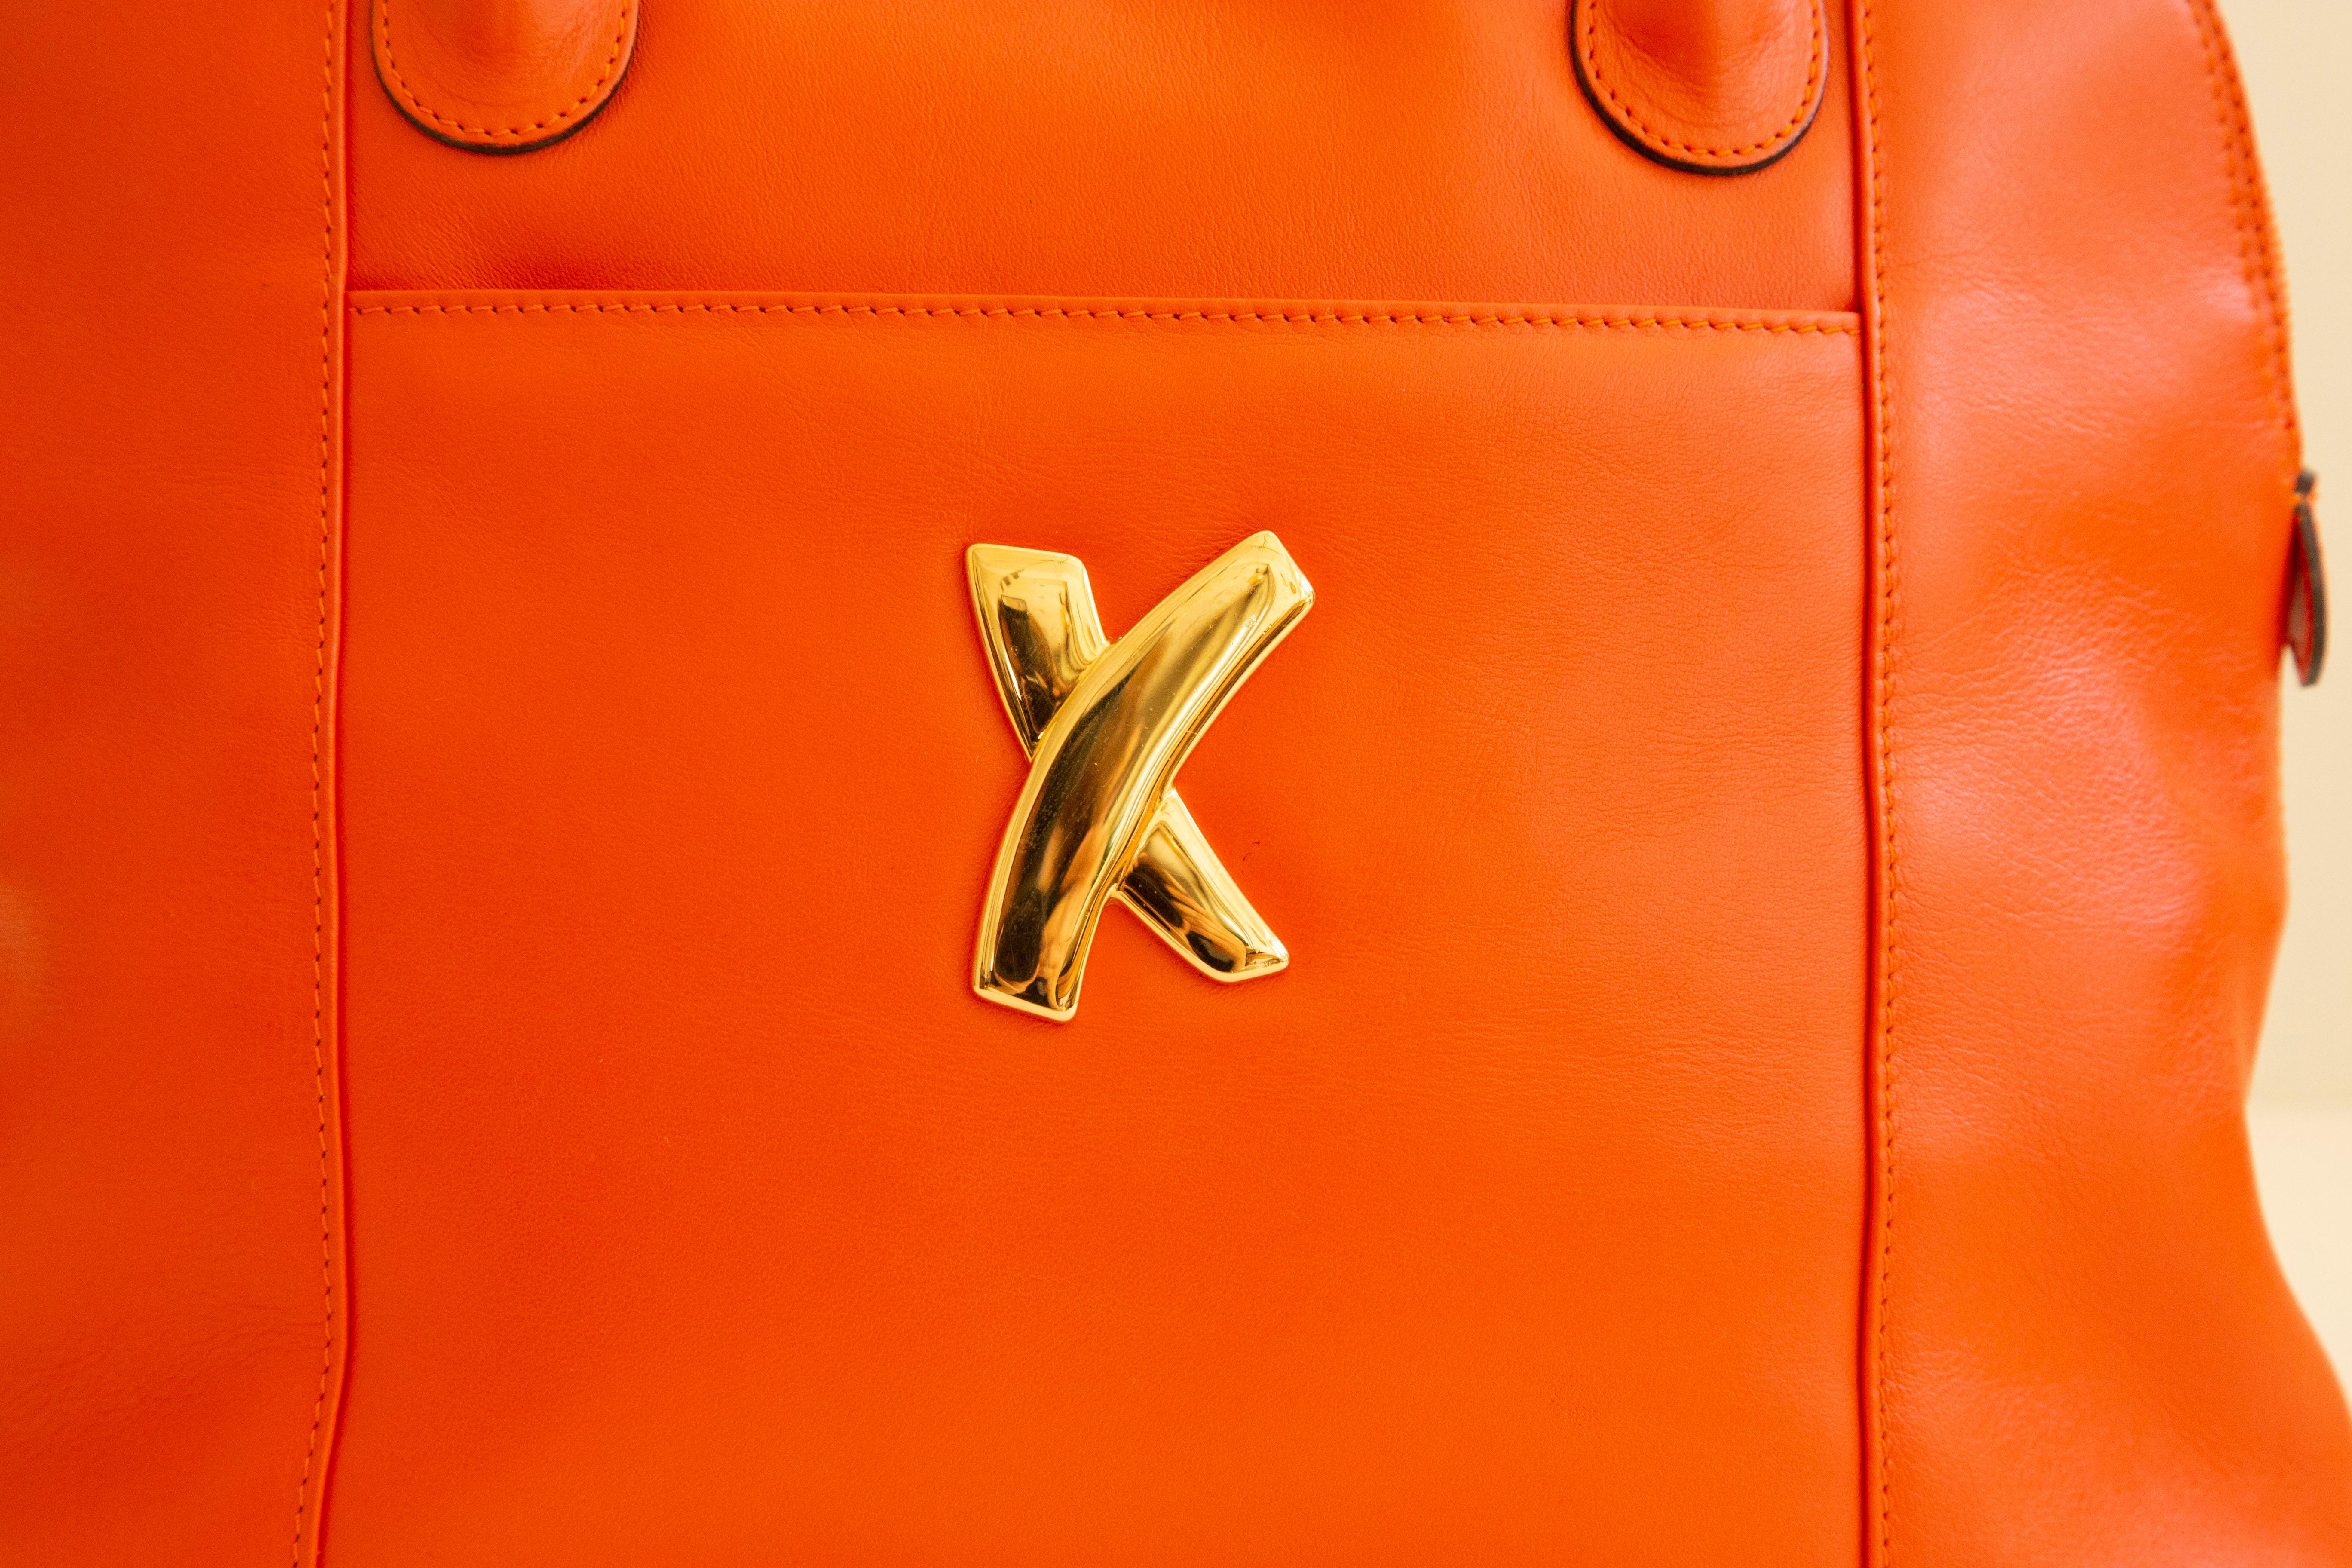 A vintage top handle bag designed by Paloma Picasso in the 1980s-90s. The bag is crafted of smooth bright soft orange leather, and it featured gold tone hardware. The interior is lined with the Paloma Picasso logo light beige fabric, and next to the